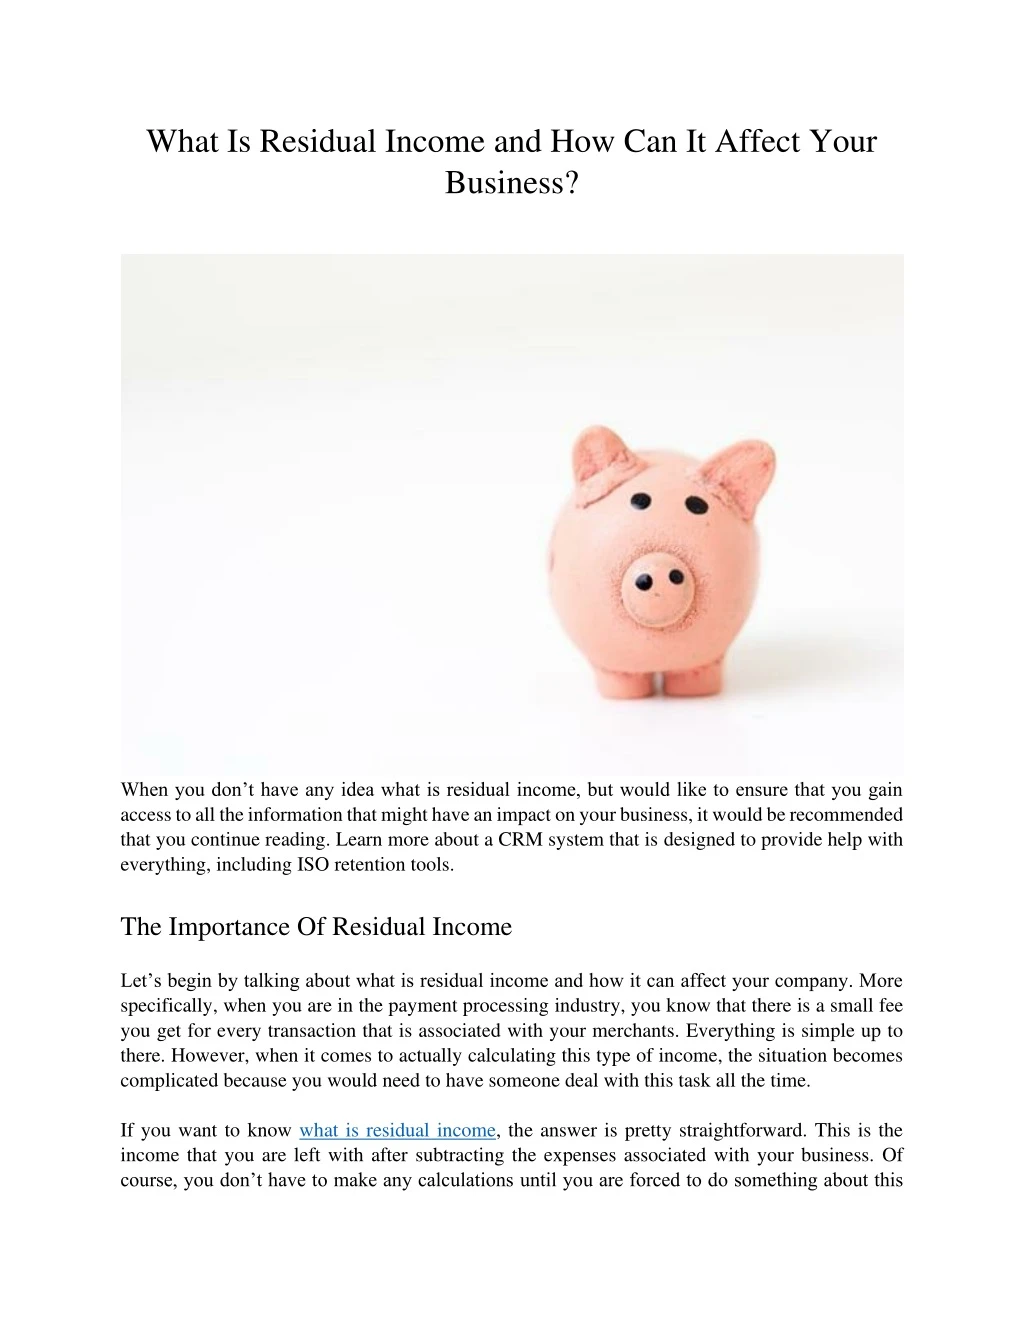 what is residual income and how can it affect